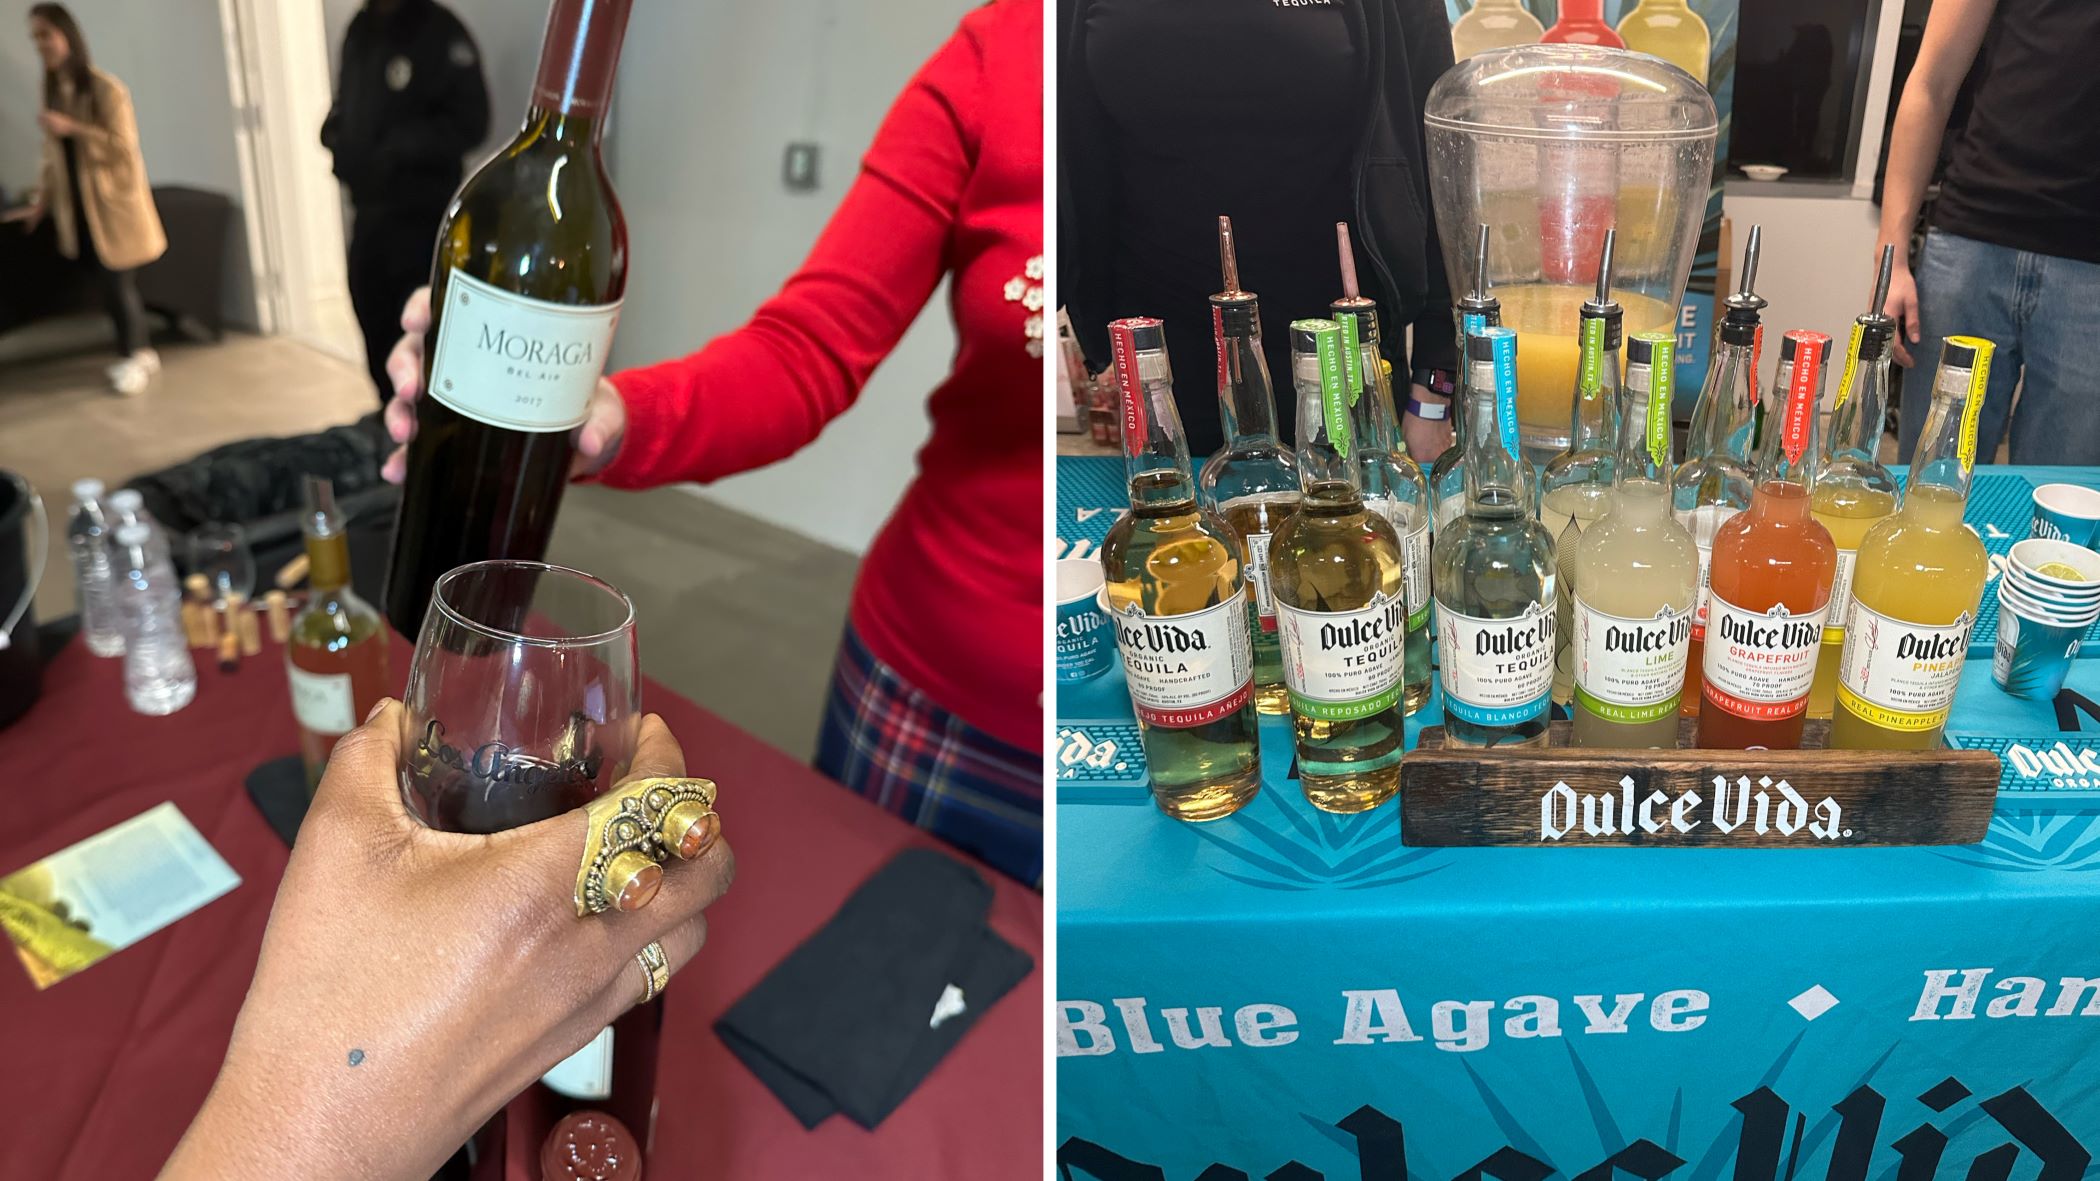 An image of a glass of wine being poured and the other image is a table of Dulce Vida cocktails.